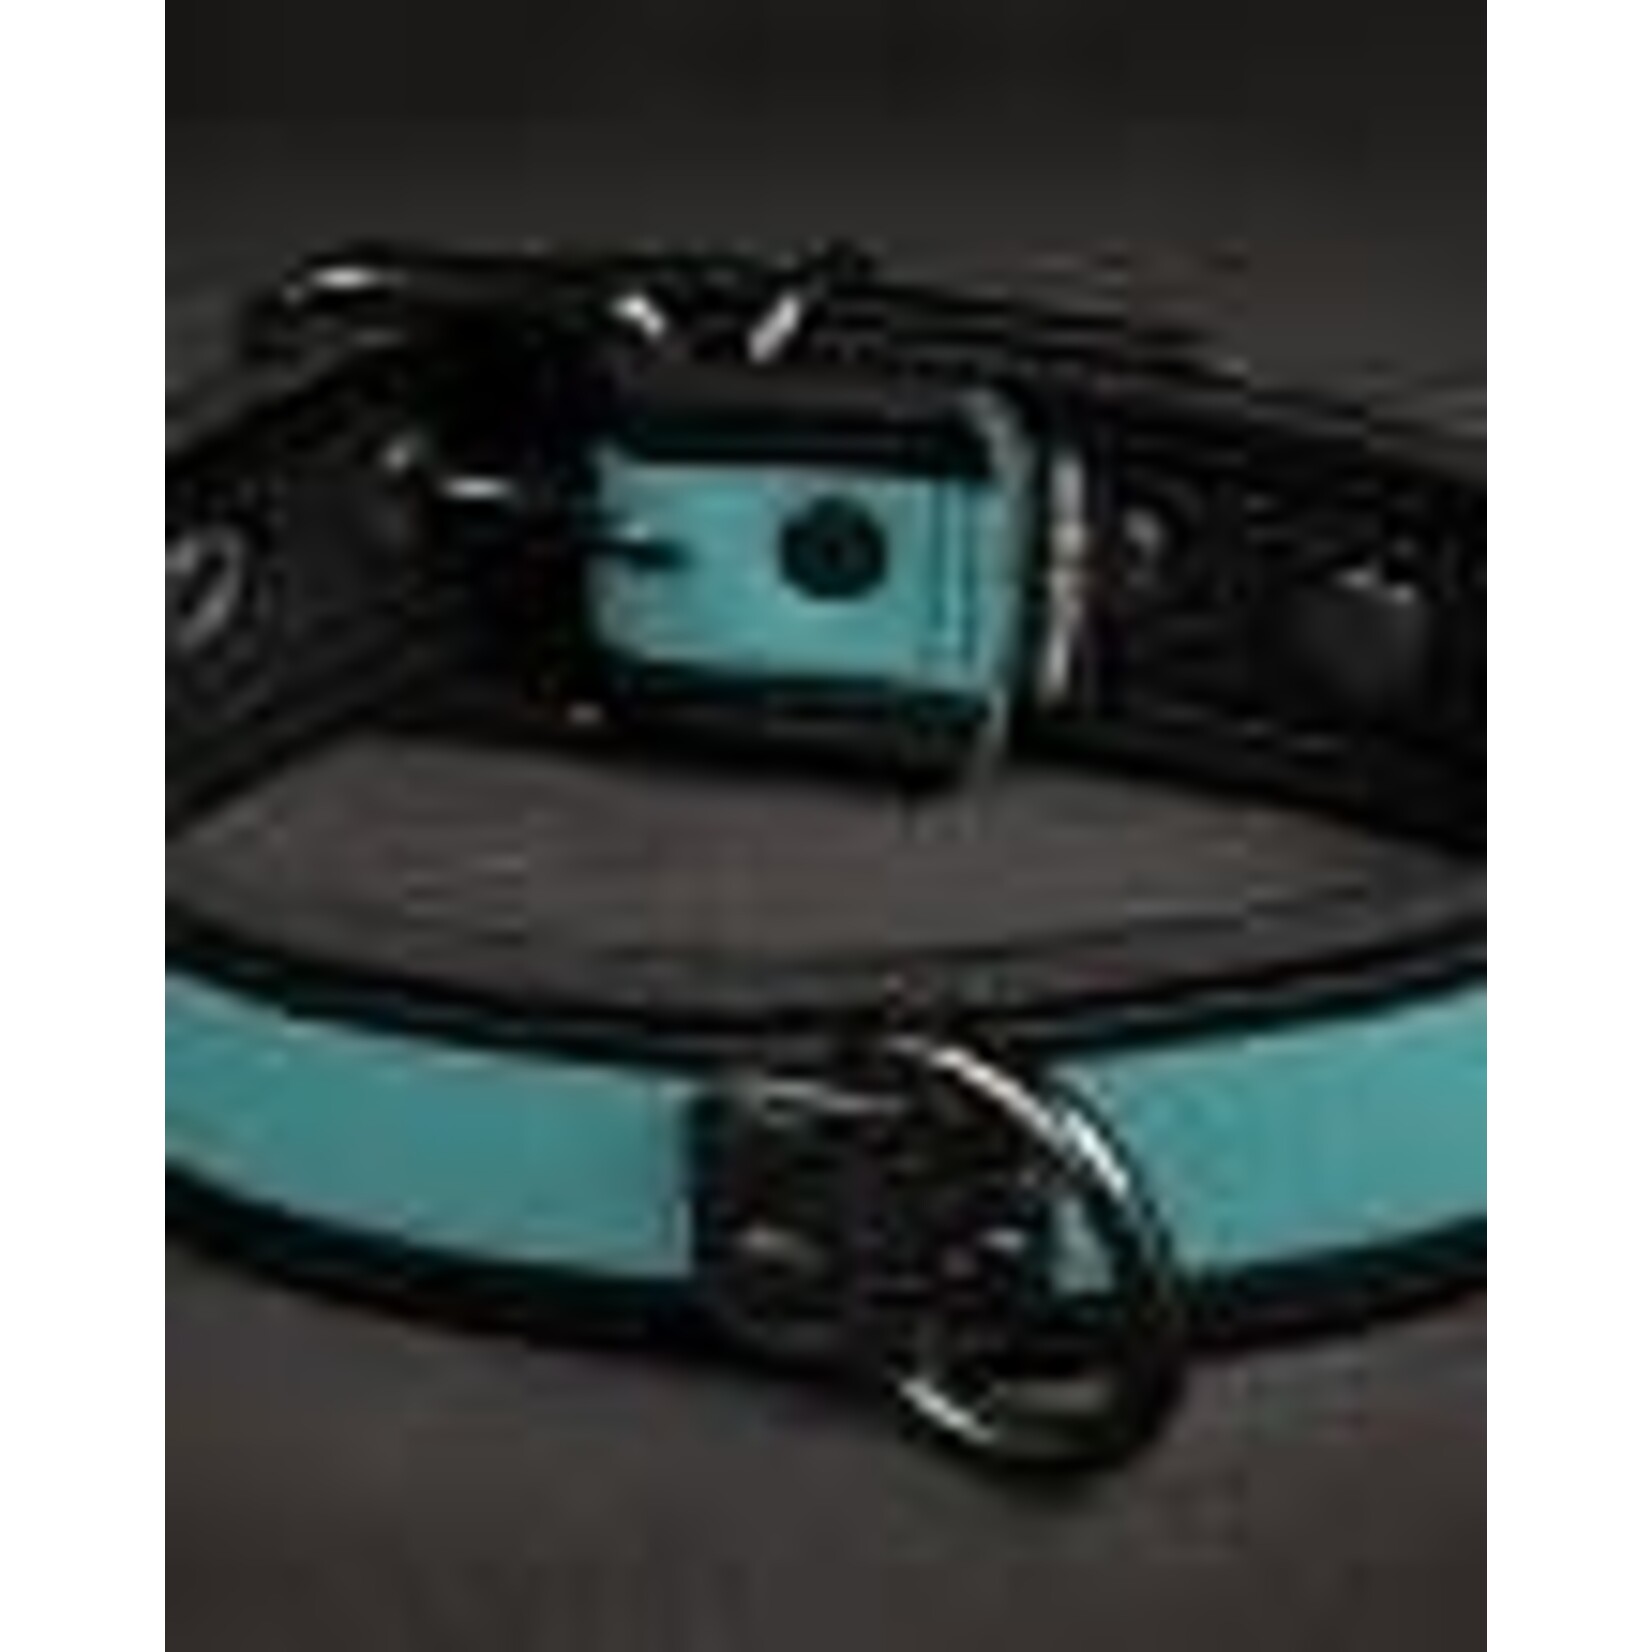 Mr. S Leather Neo Puppy Collar